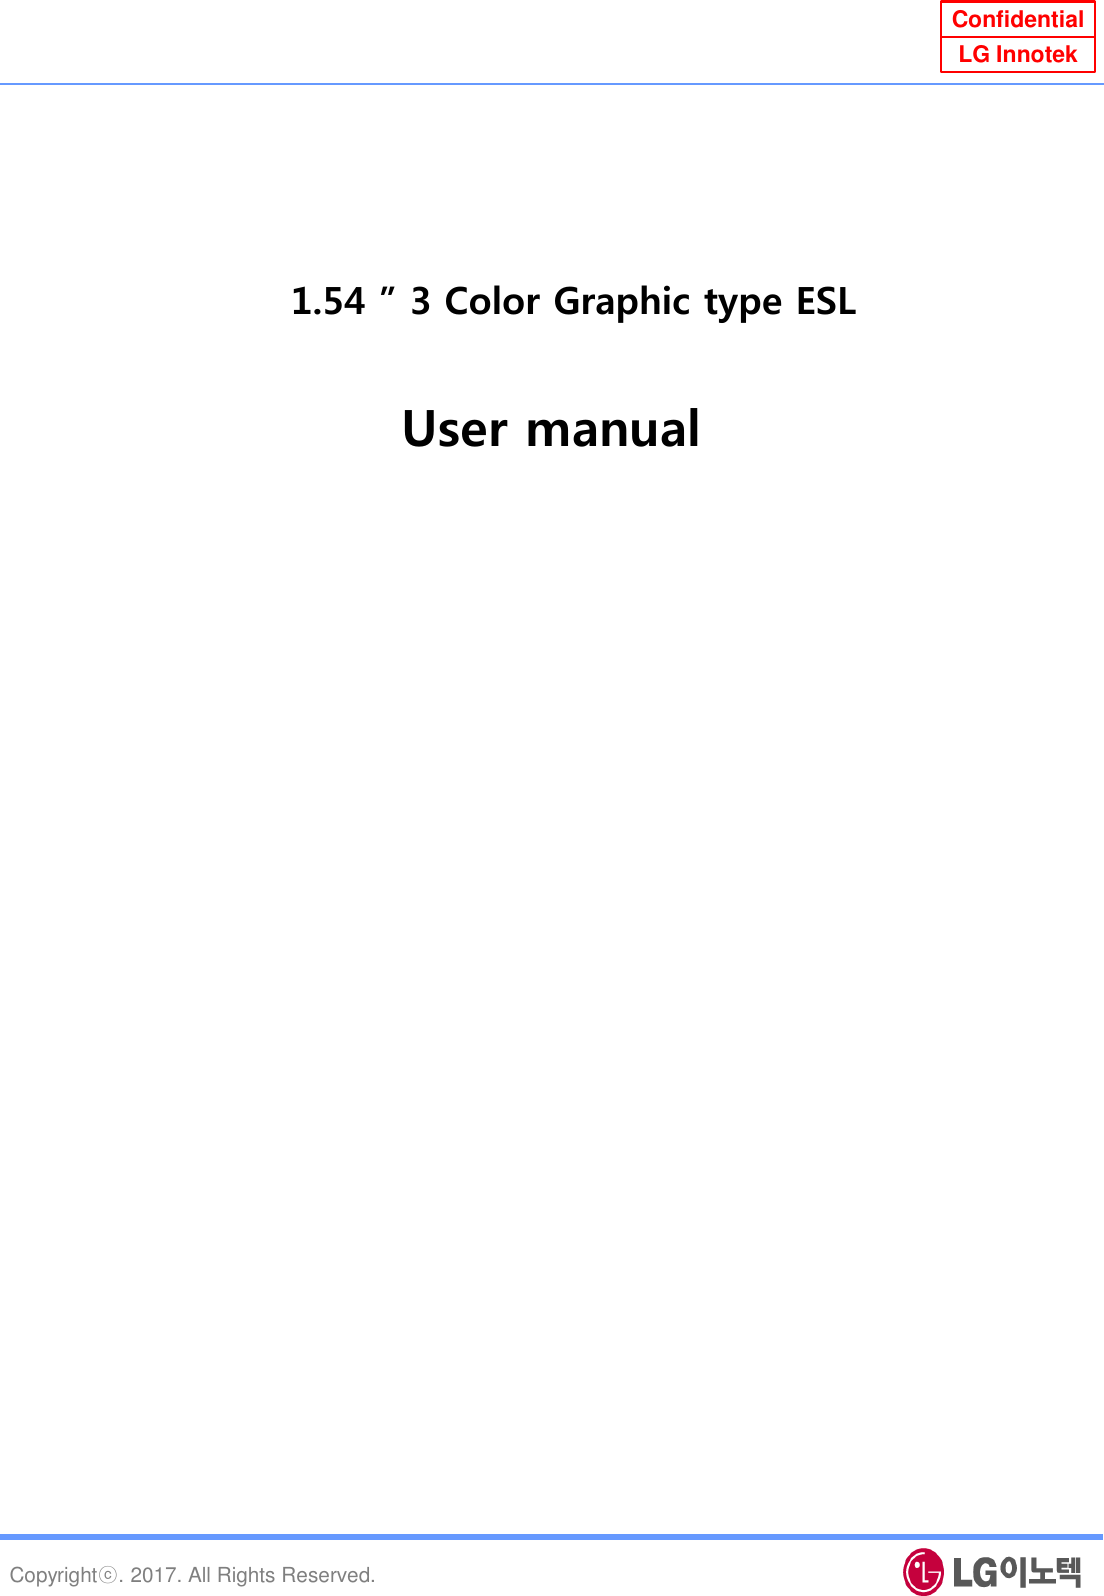 Copyrightⓒ. 2017. All Rights Reserved. Confidential LG Innotek 1.54 ” 3 Color Graphic type ESL User manual 